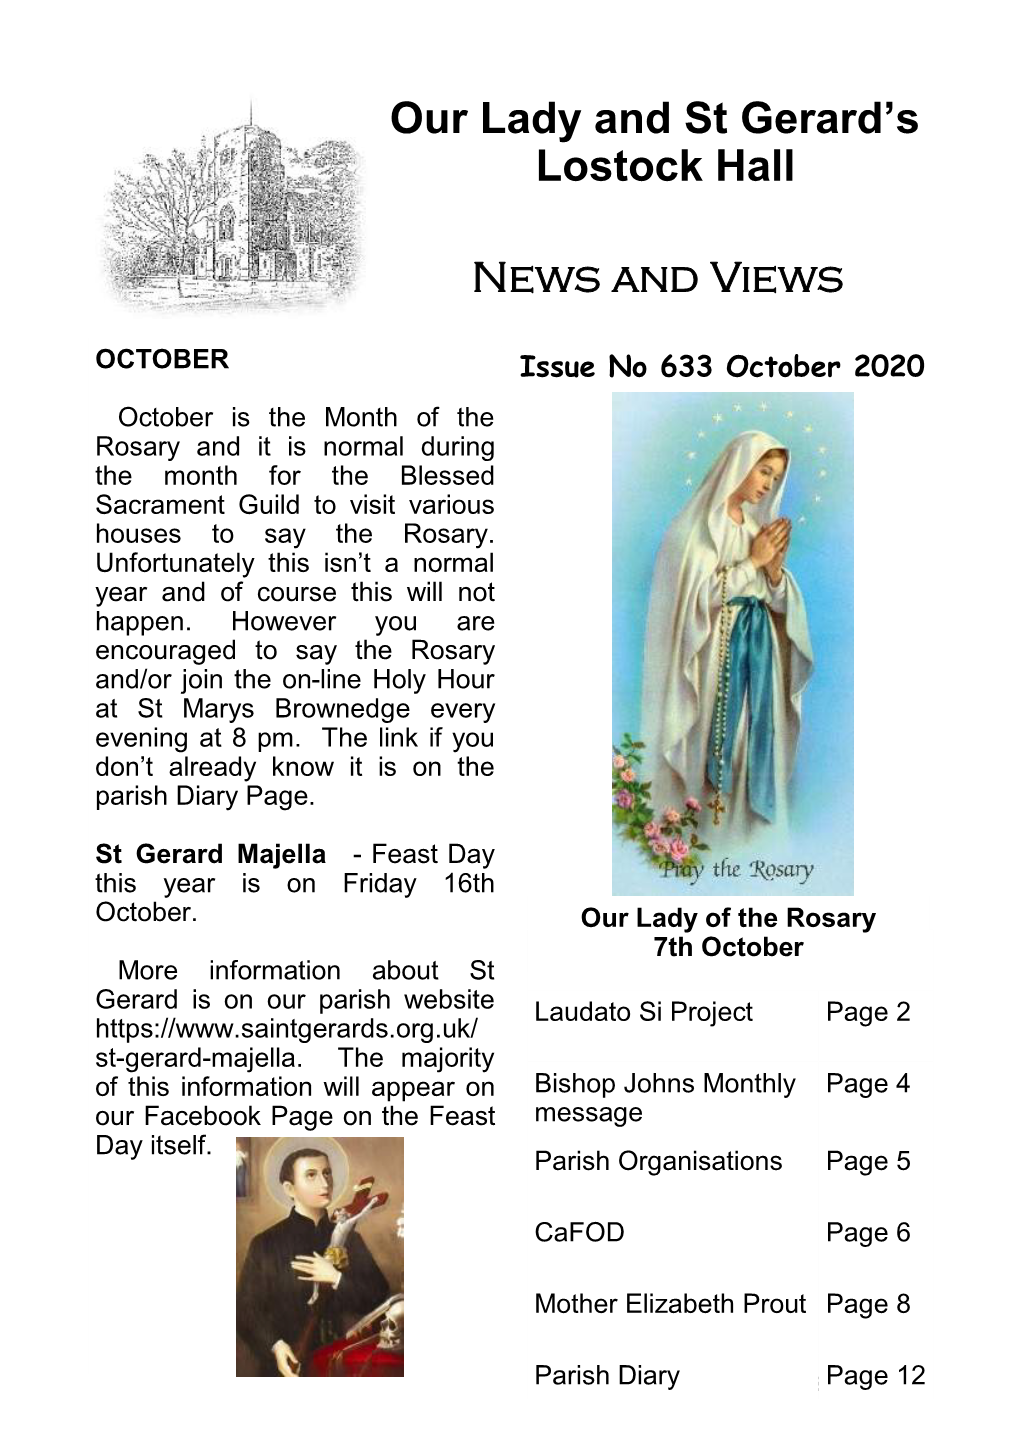 Our Lady and St Gerard's Lostock Hall News and Views